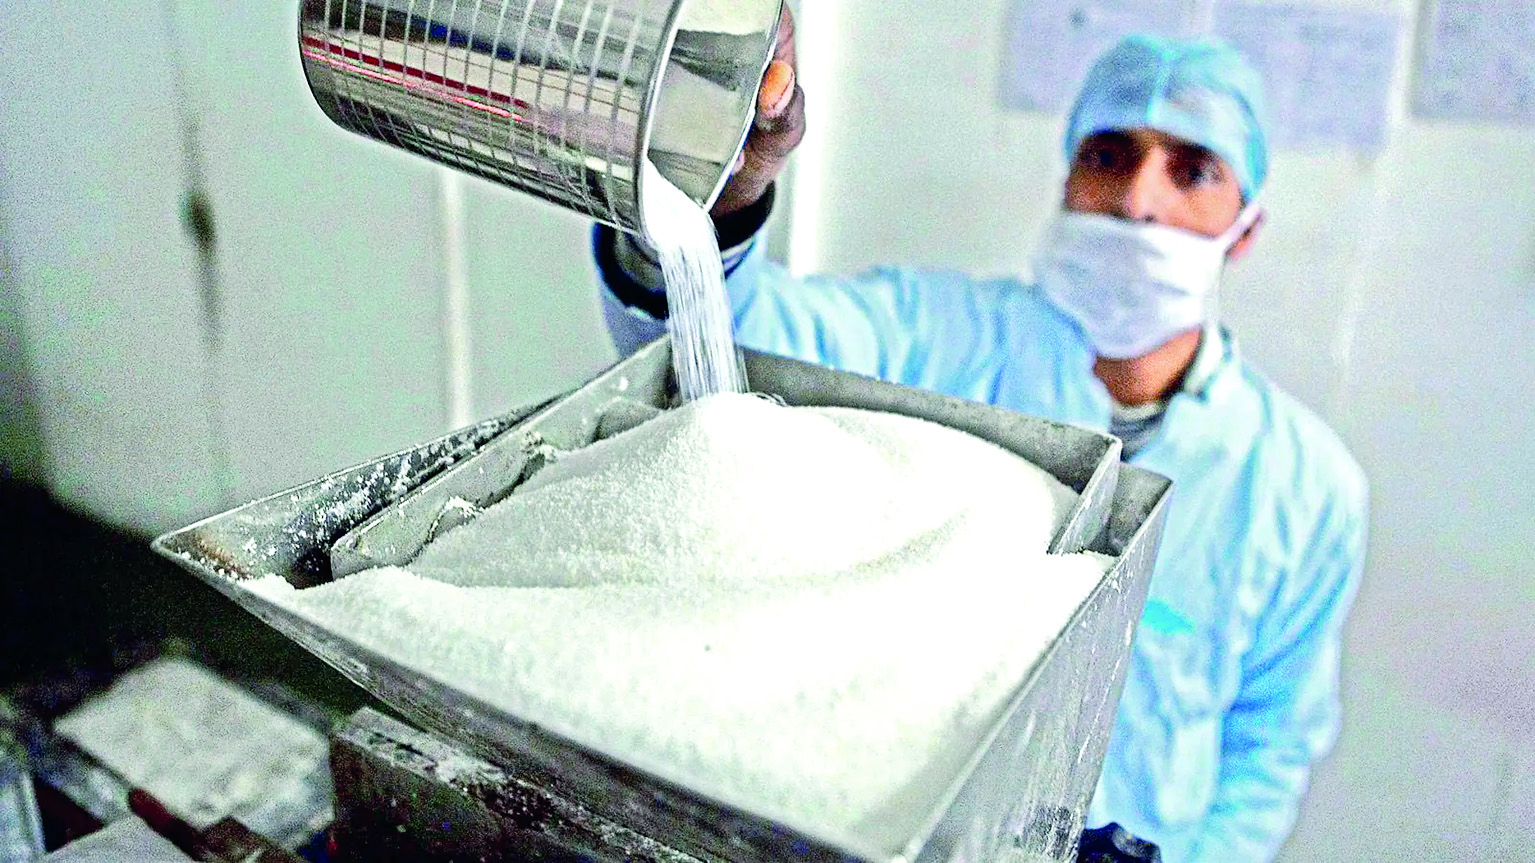 Govt’s sugar policies ensured stable retail prices, timely payment to farmers: Official